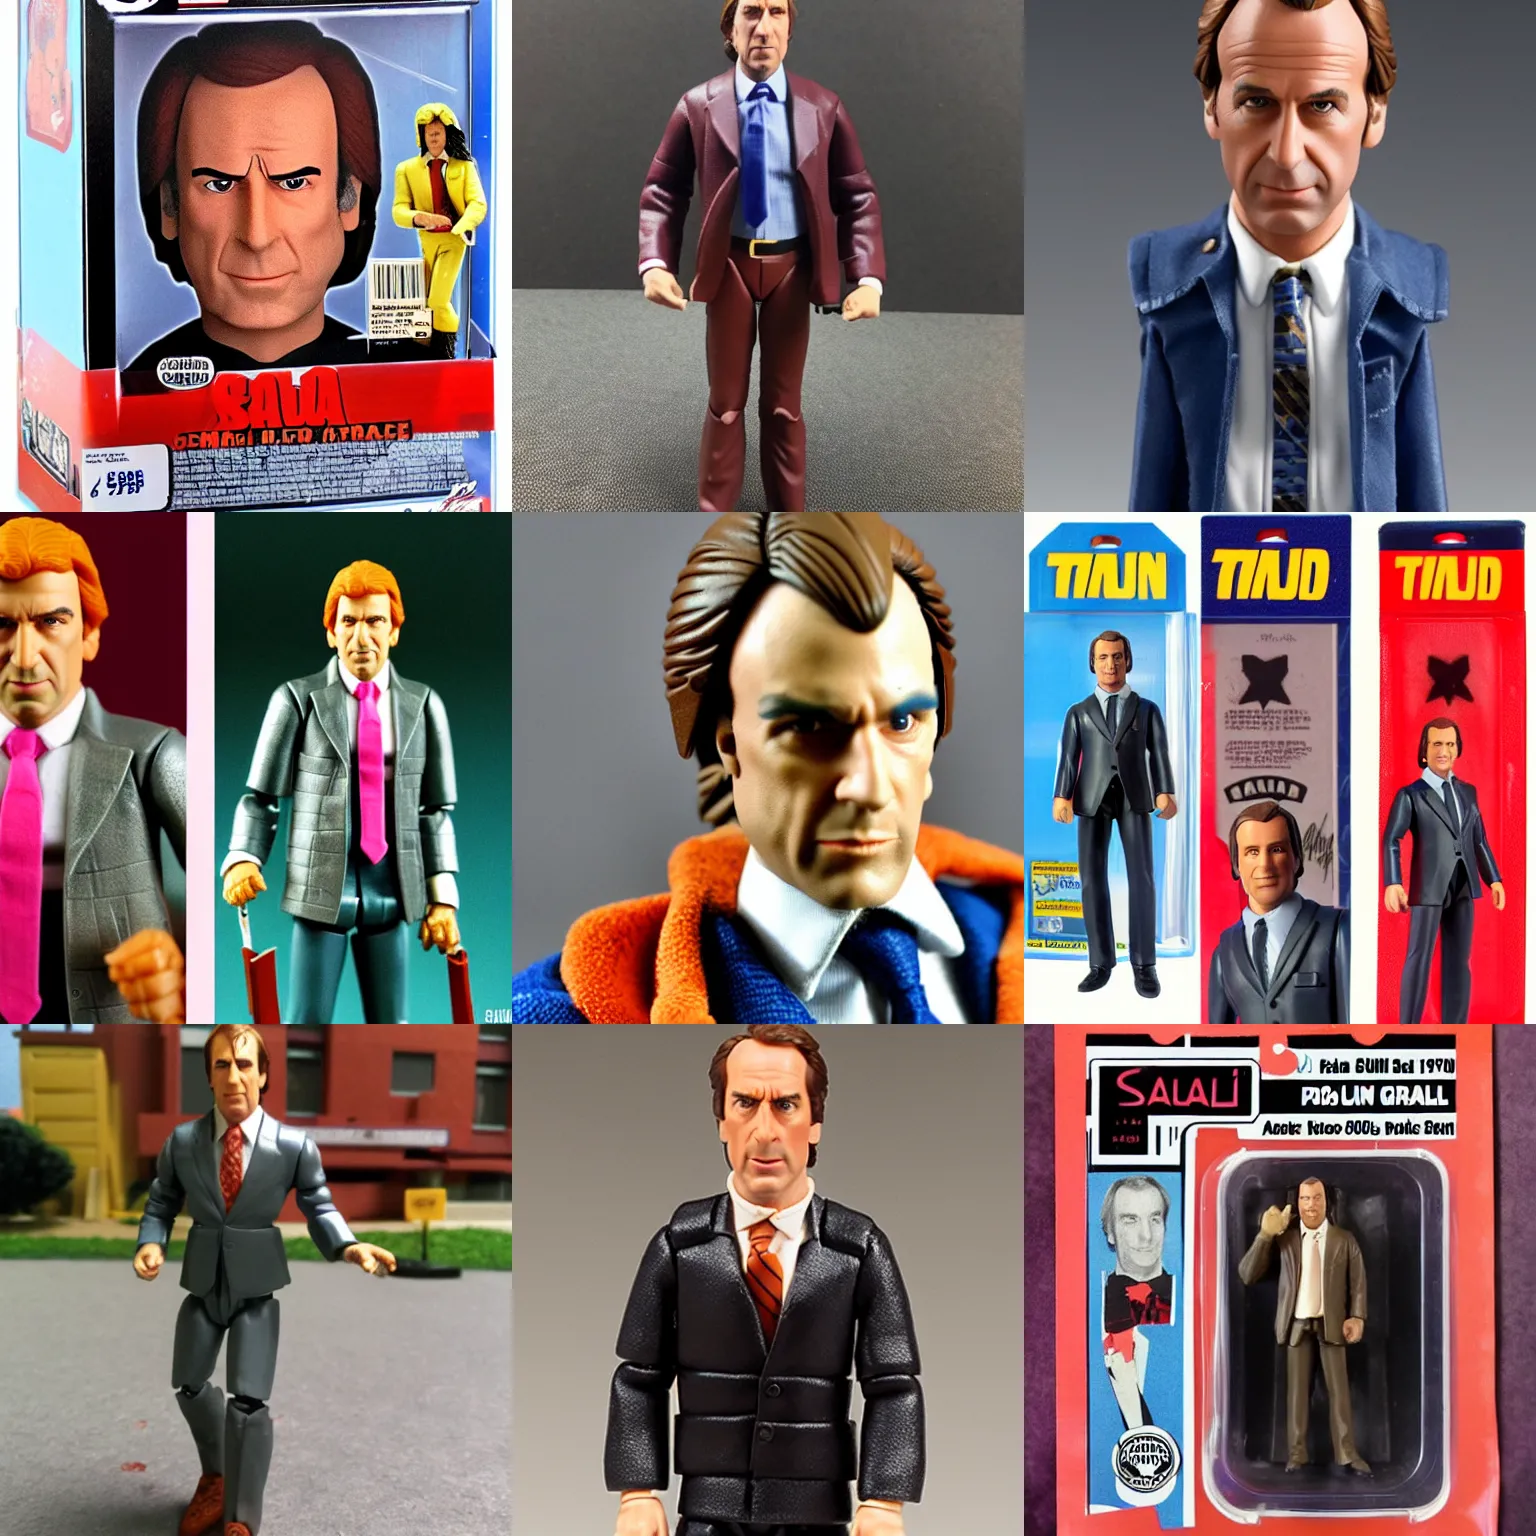 Prompt: Saul Goodman as a 1980s style action figure